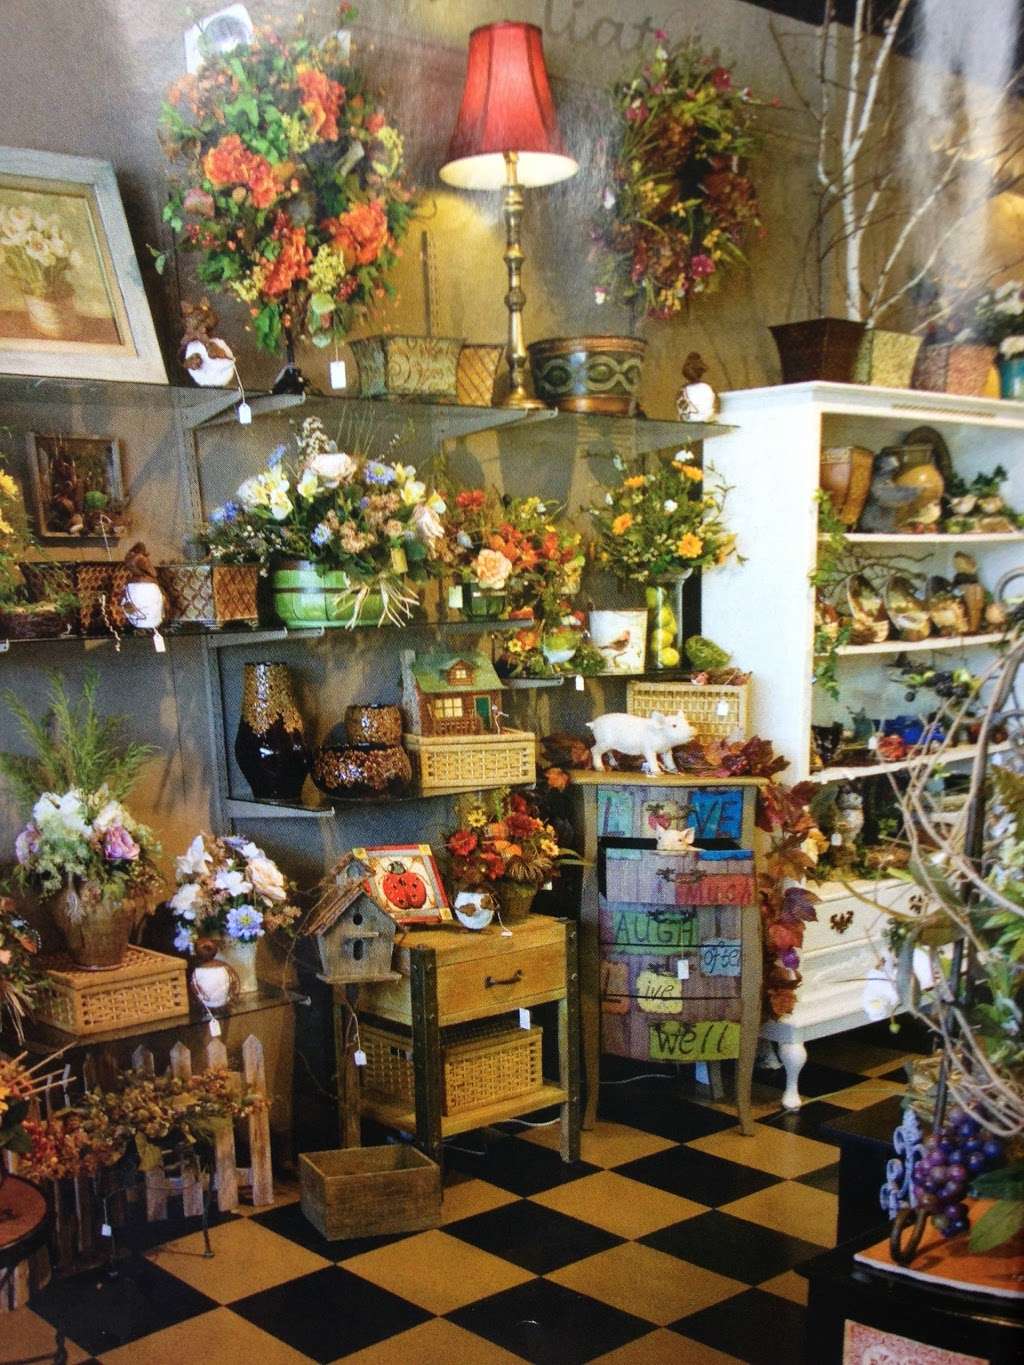 Queen Annes Lace Flowers & Gifts | 680 E 56th St, Brownsburg, IN 46112 | Phone: (317) 858-8170